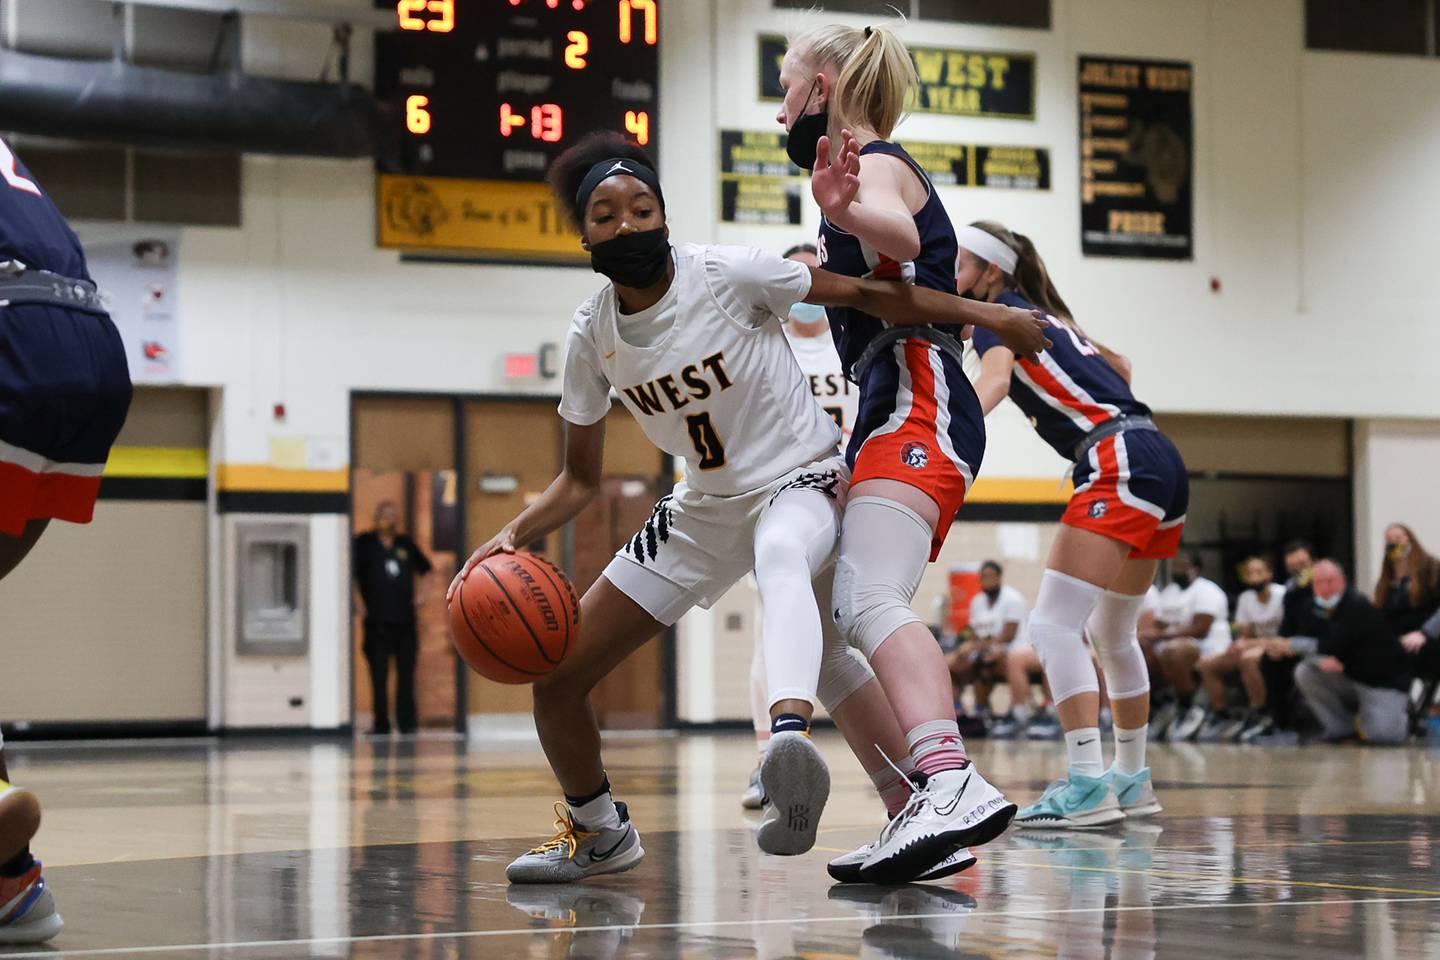 Joliet West's Lisa Thompson makes a play to the basket against Romeoville. Monday, Jan. 10, 2022 in Joliet.